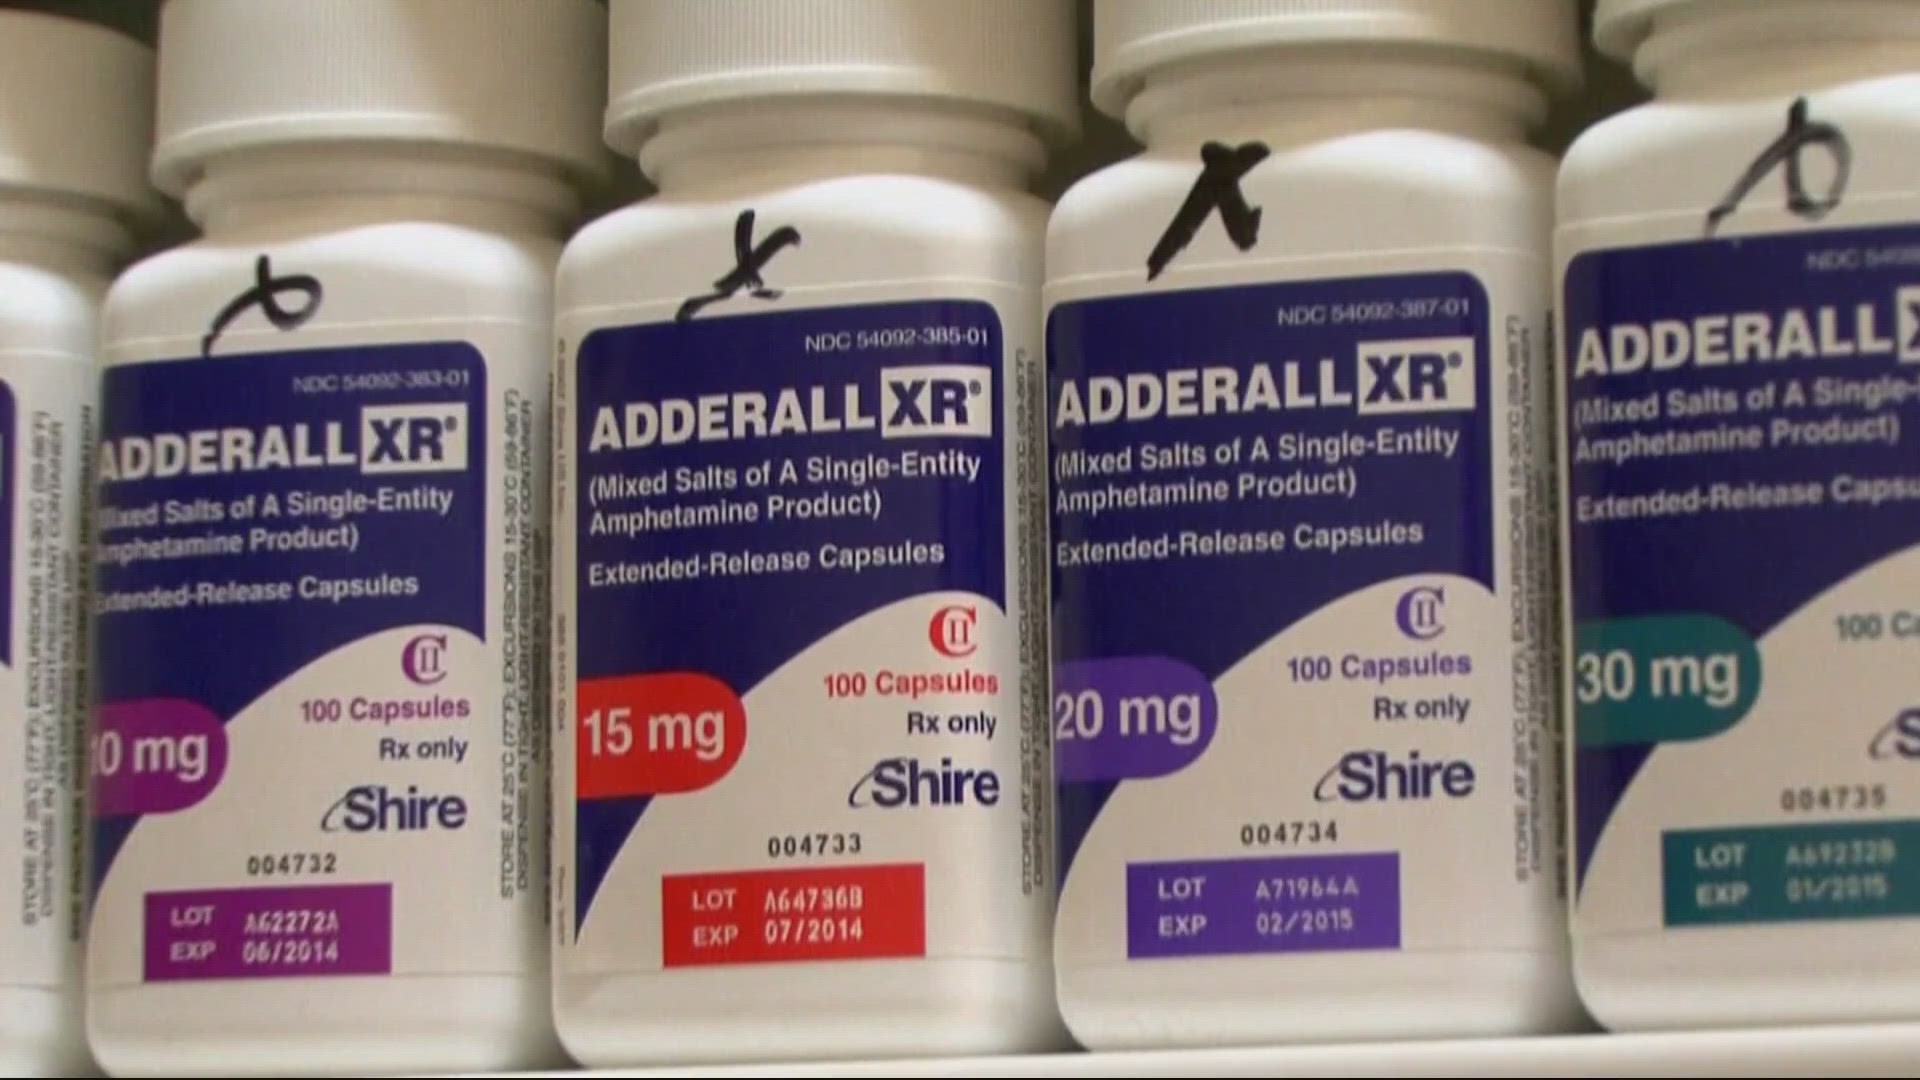 Last year the FDA announced an adderall shortage because companies experienced ongoing intermittent manufacturing delays while others struggled to meet high demand.